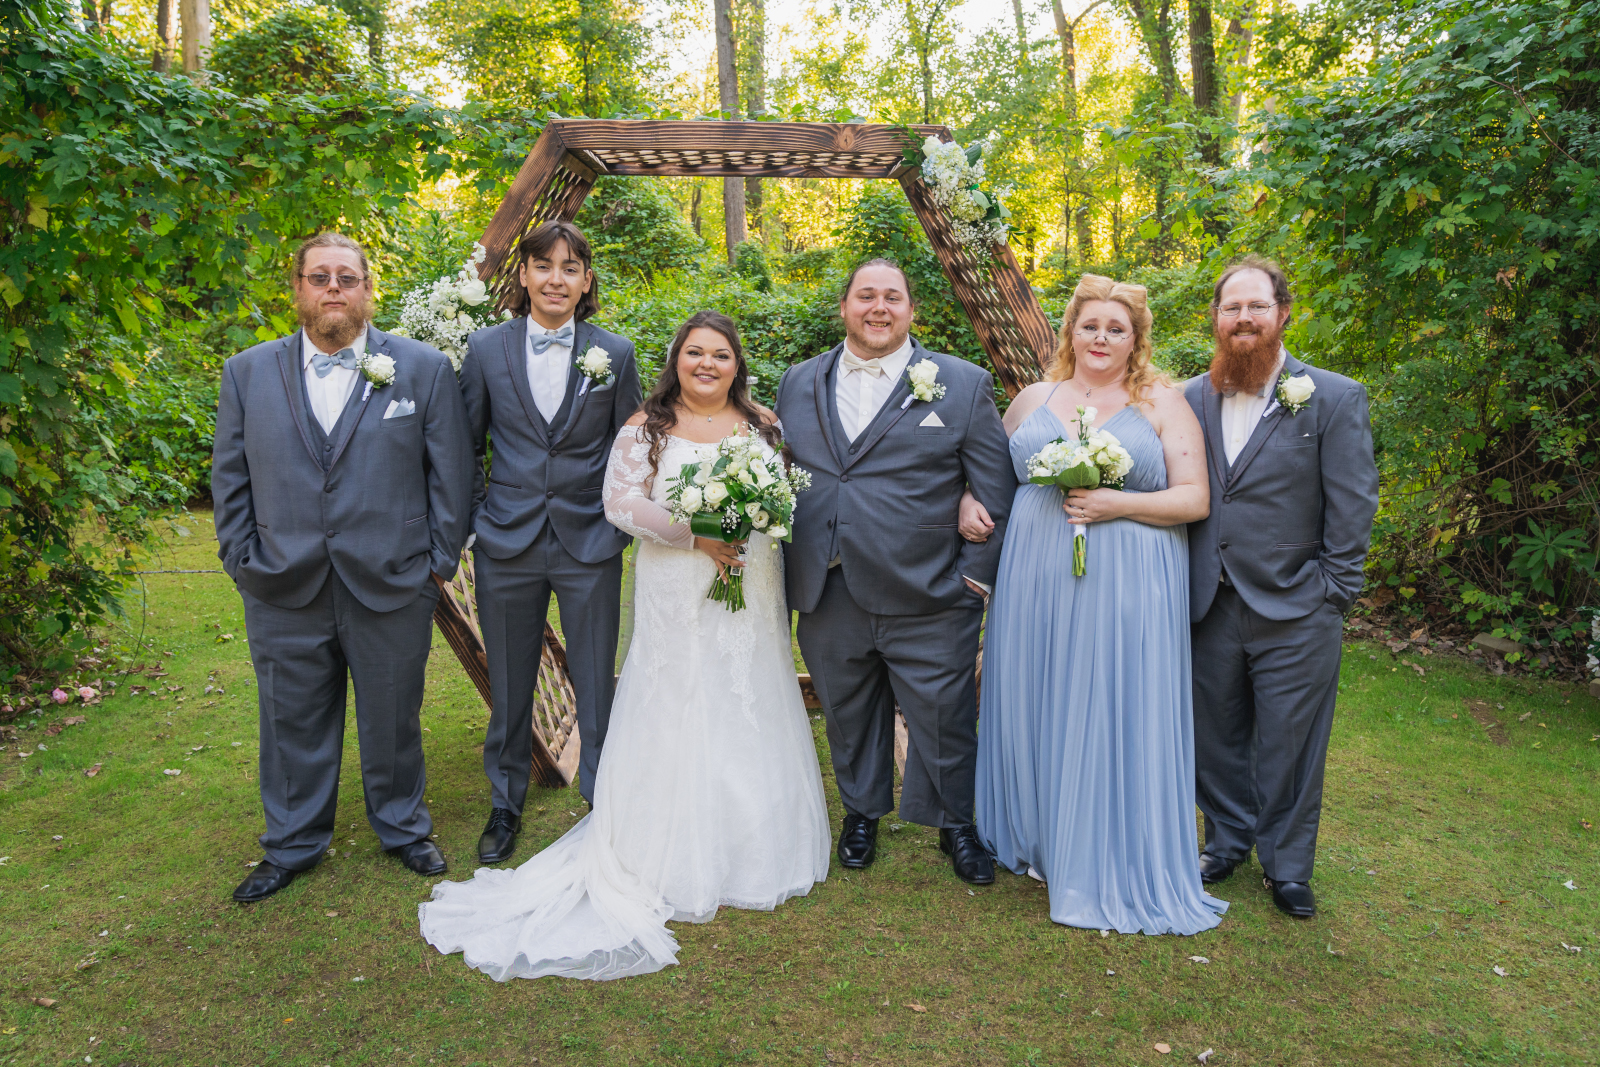 Bride and groom with bridal party, bridal party portrait, hexagon arch, green, nature, trees, outdoor September wedding ceremony at Westfall Event Center